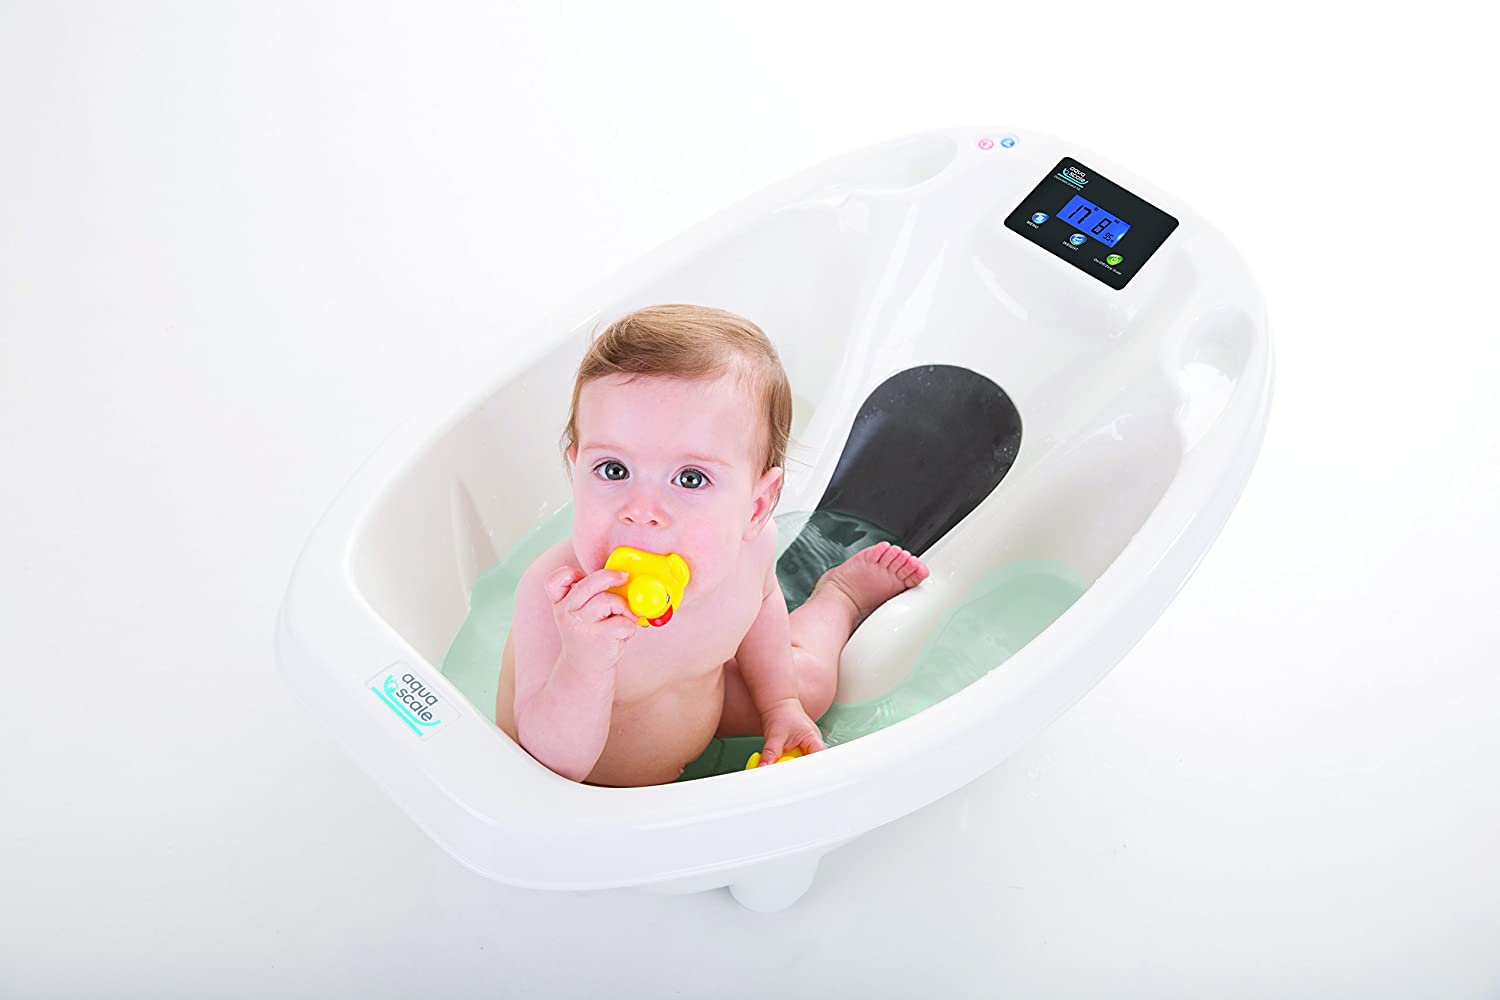 AquaScale 3-in-1 Digital Scale, Water Thermometer and Infant Tub - image 2 of 5